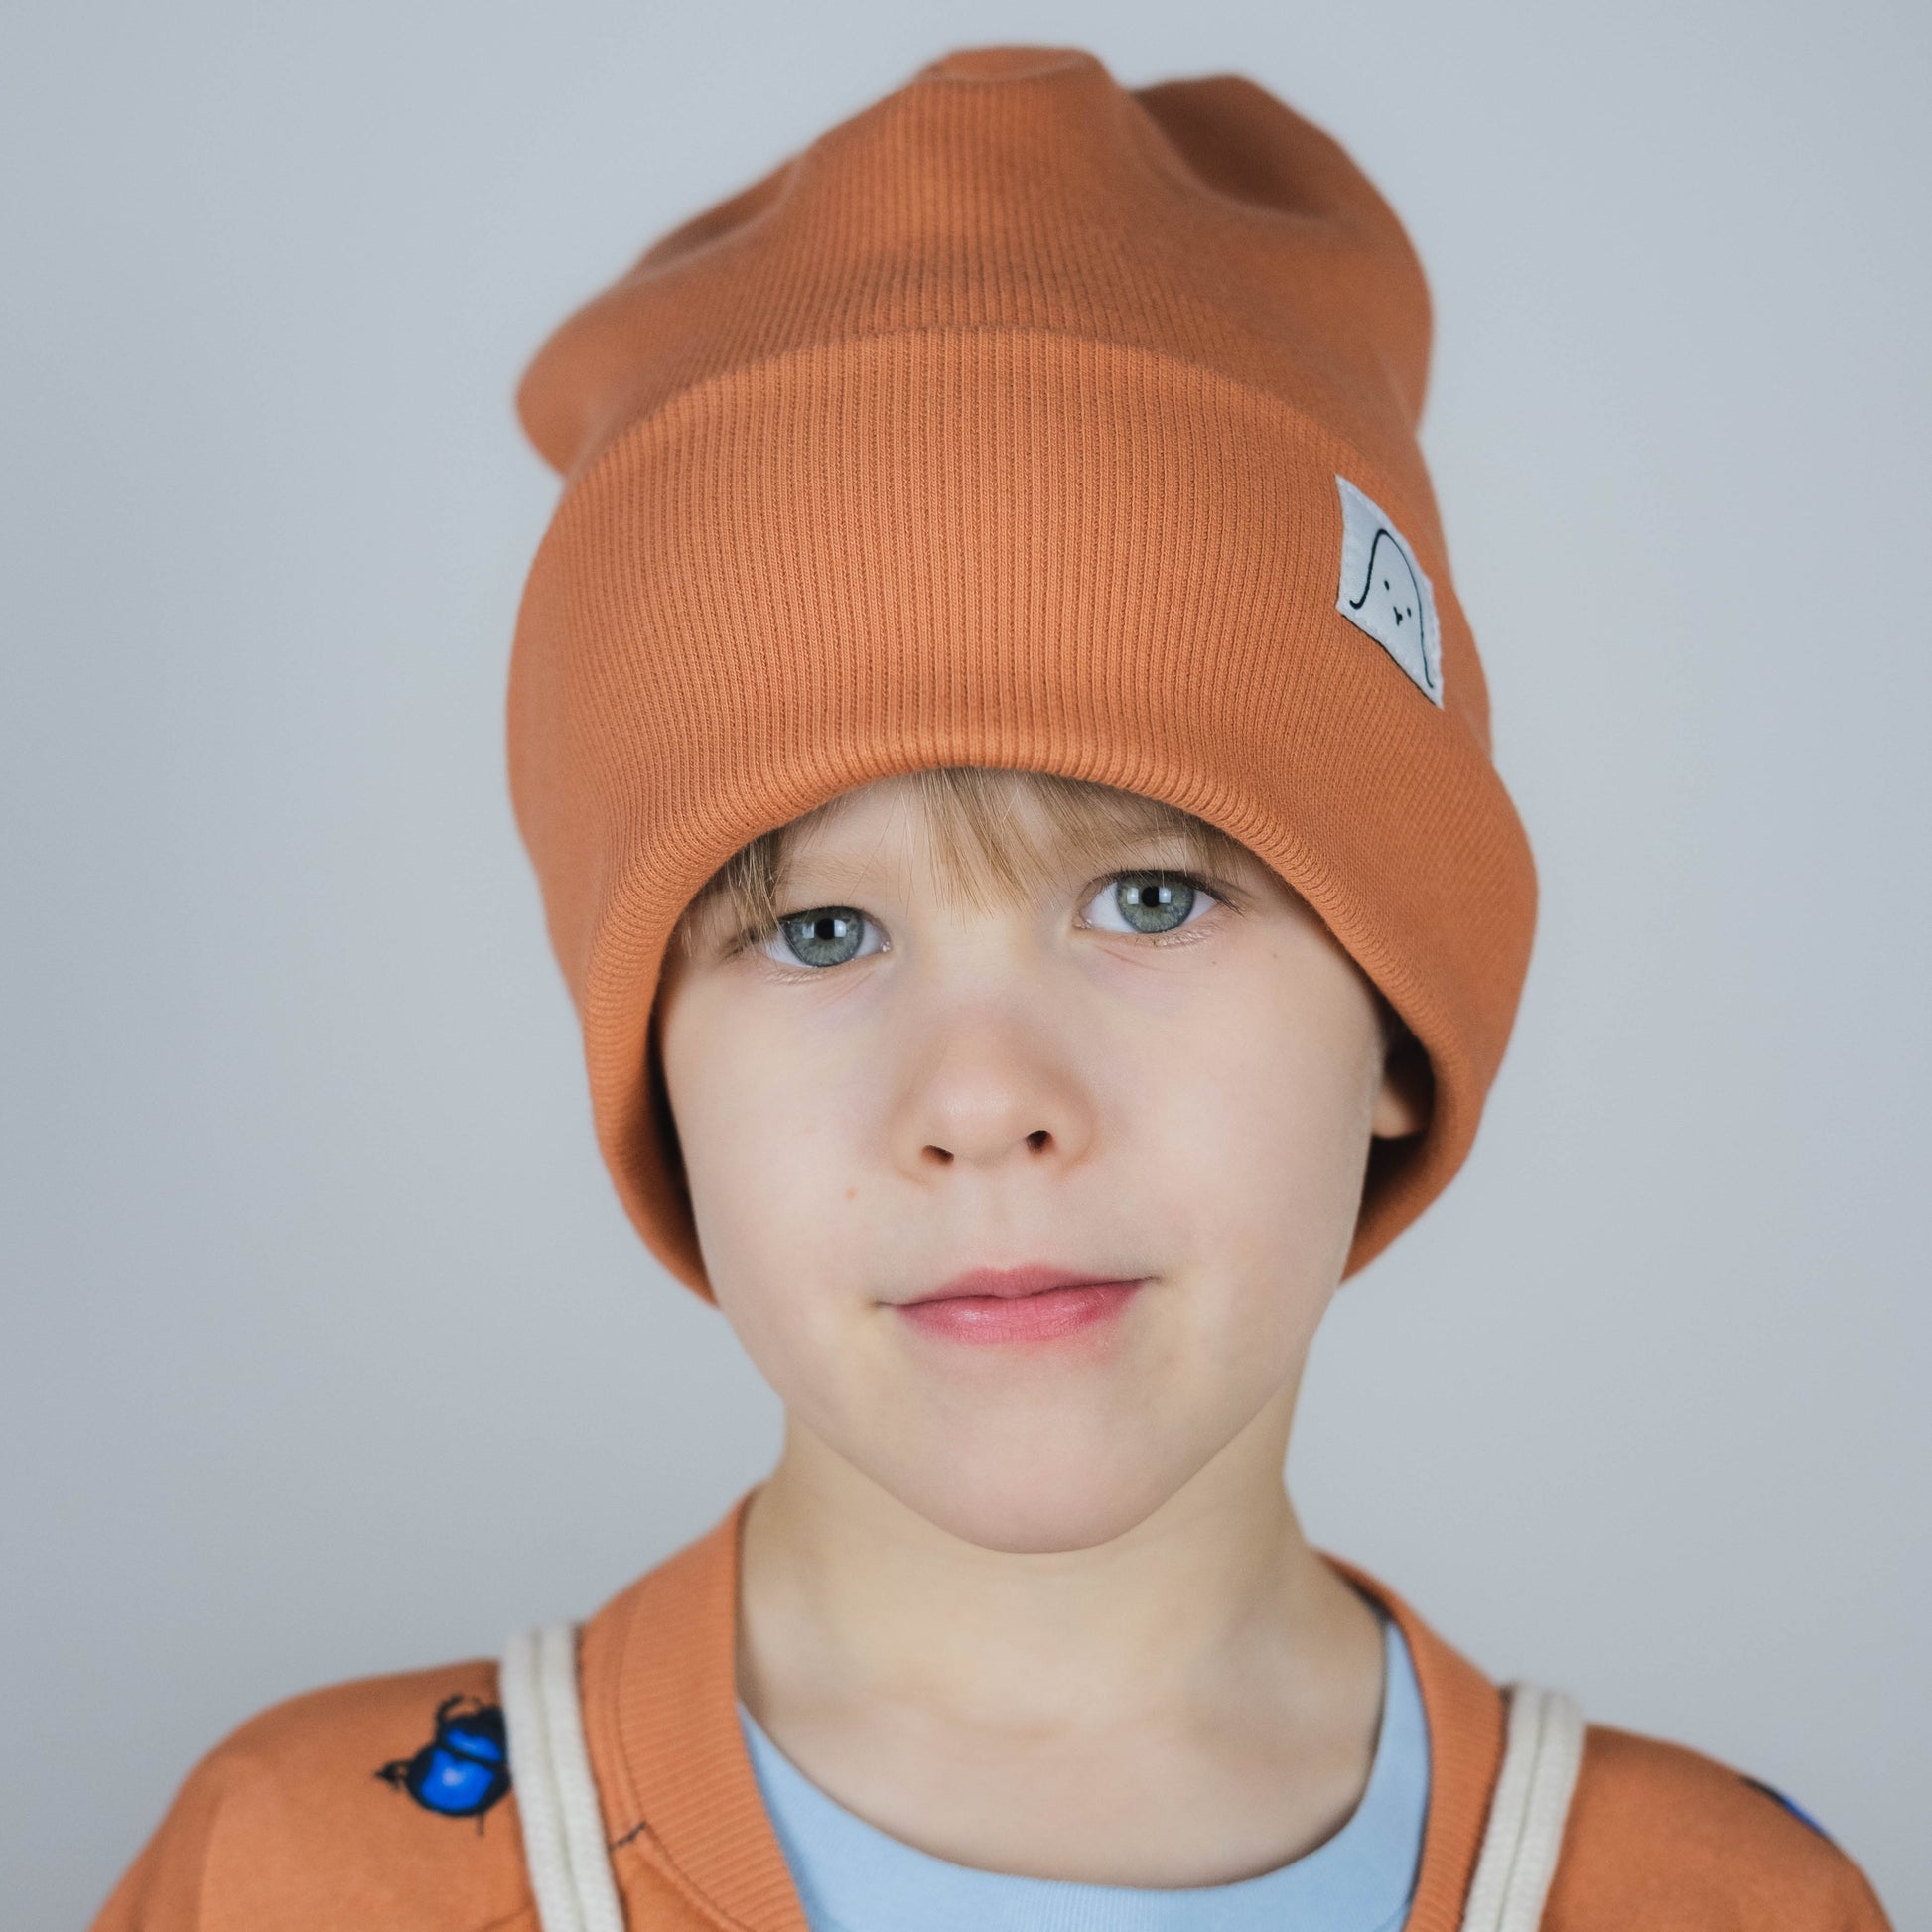 With some left-over organic rib fabric, we saw the possibility to create something new to complete the outfit: a skater-styled beanie.